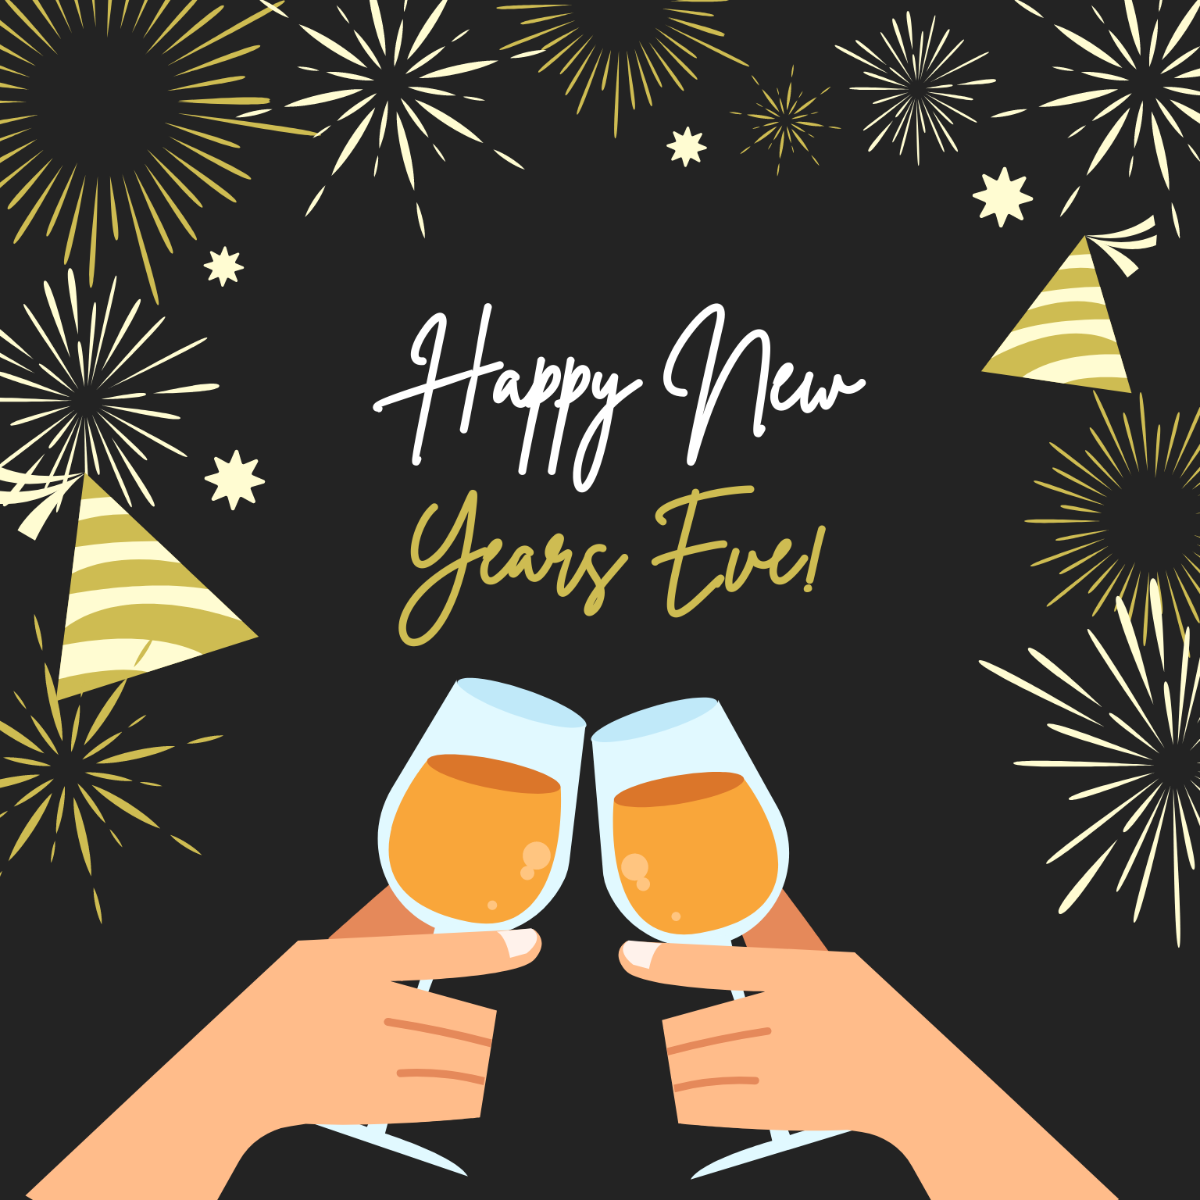 Happy New Year's Eve Illustration Template